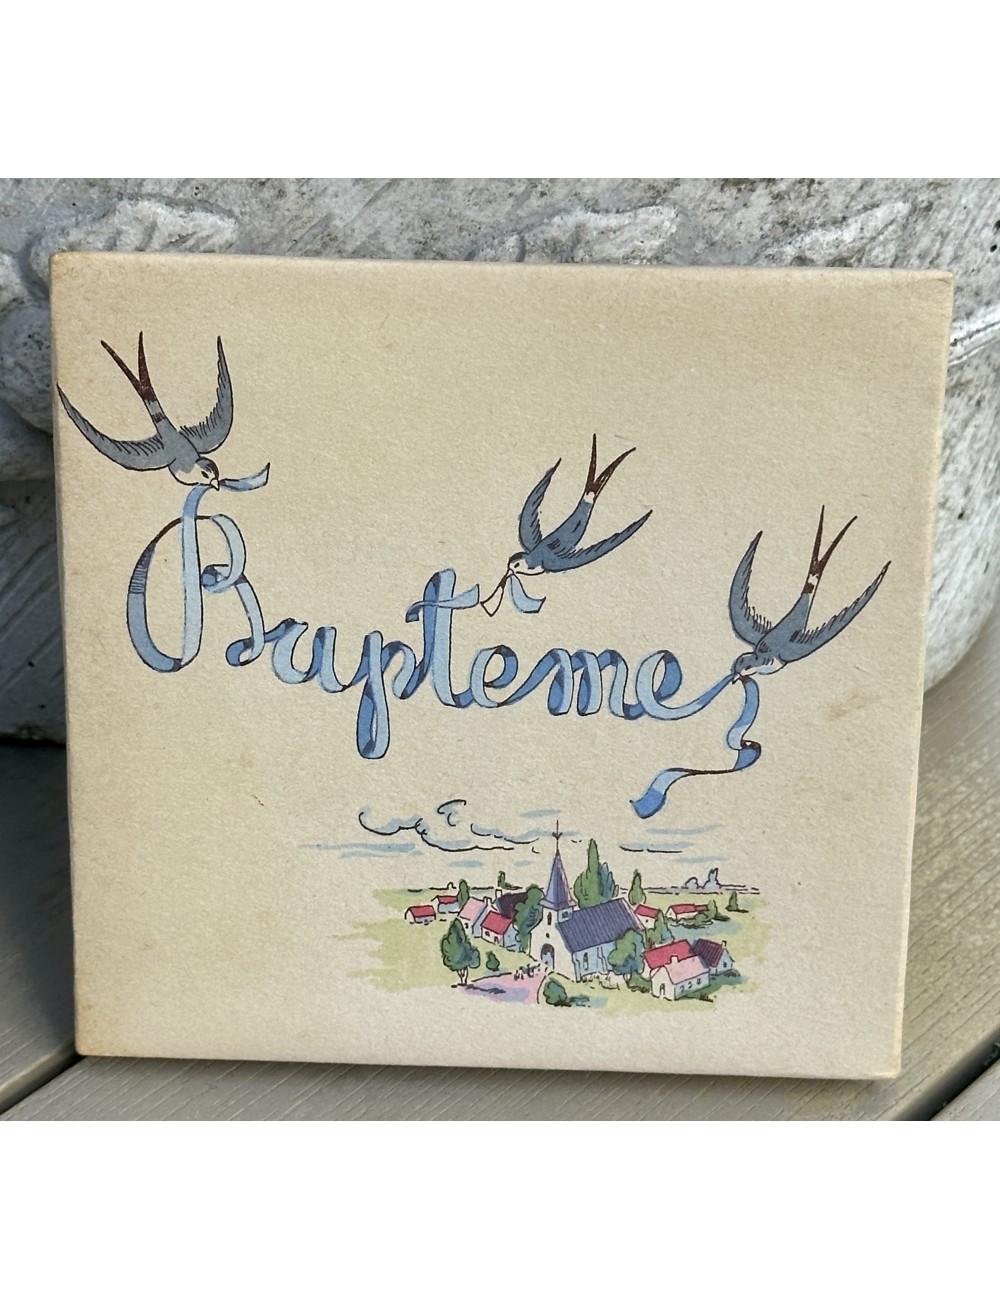 Christening sugar box - square model with image of swallows and the word 'BAPTÈME'